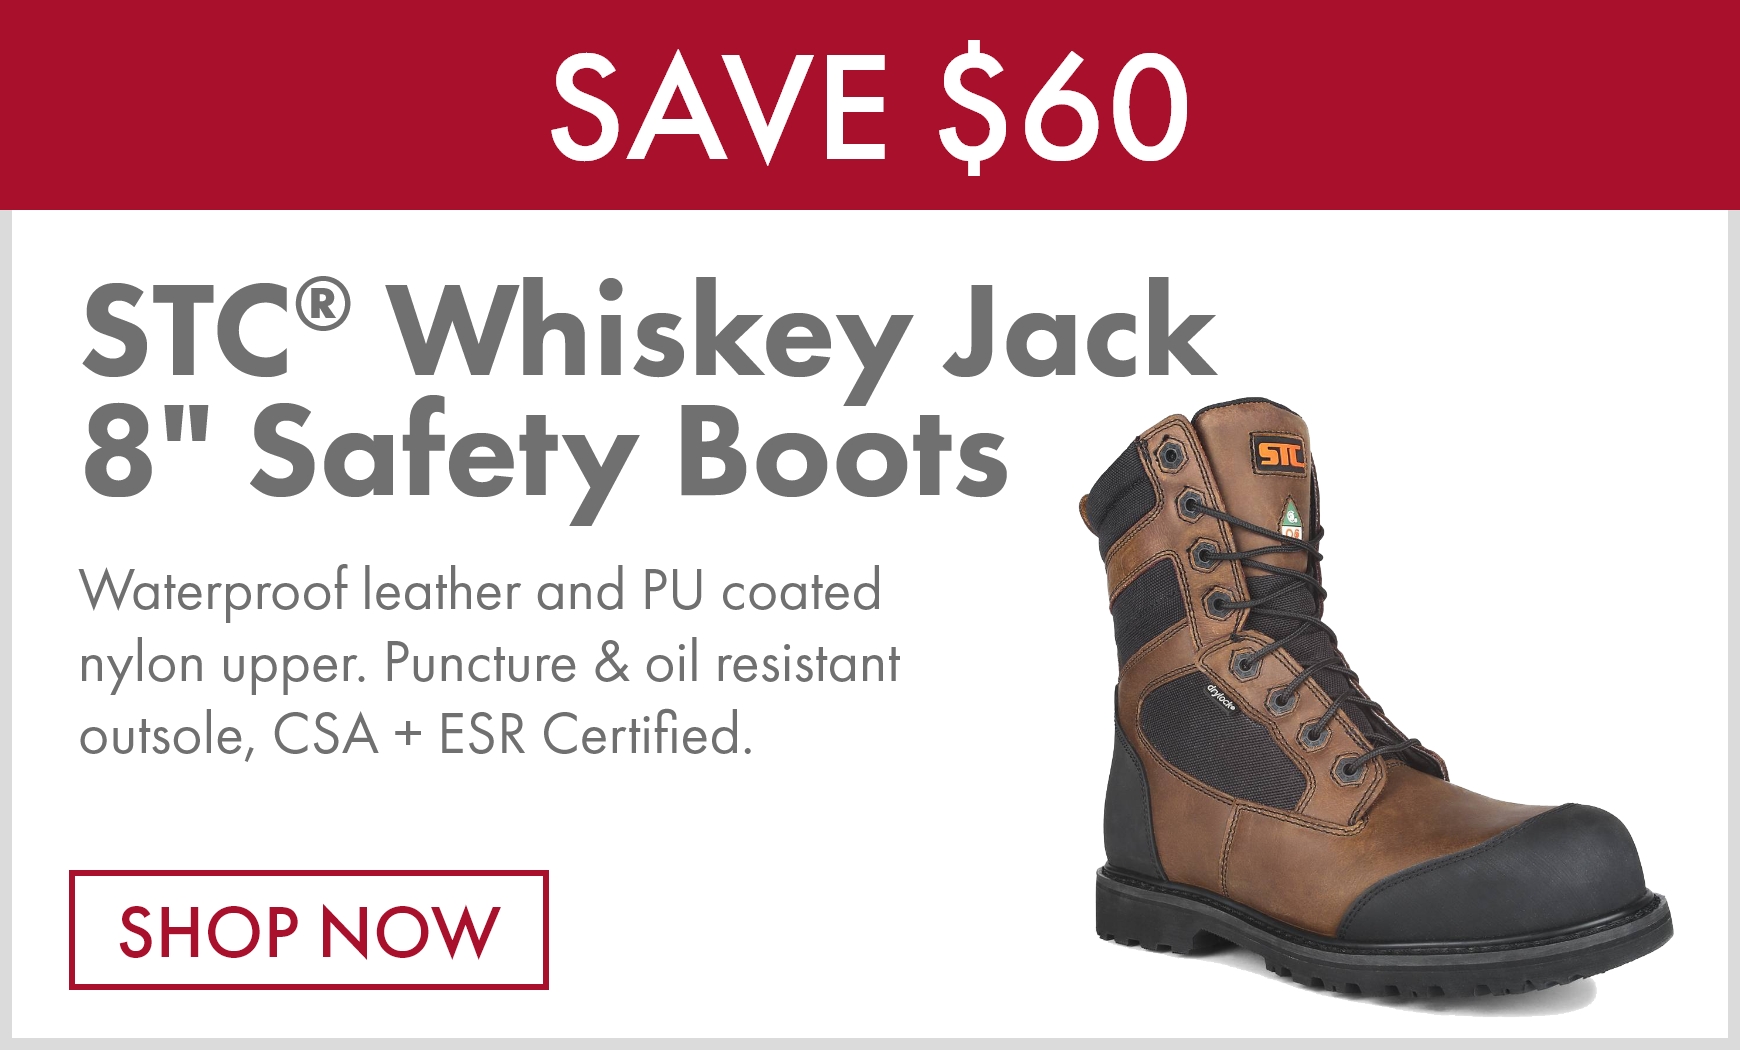 Stc® Whiskey Jack 8" Safety Boots